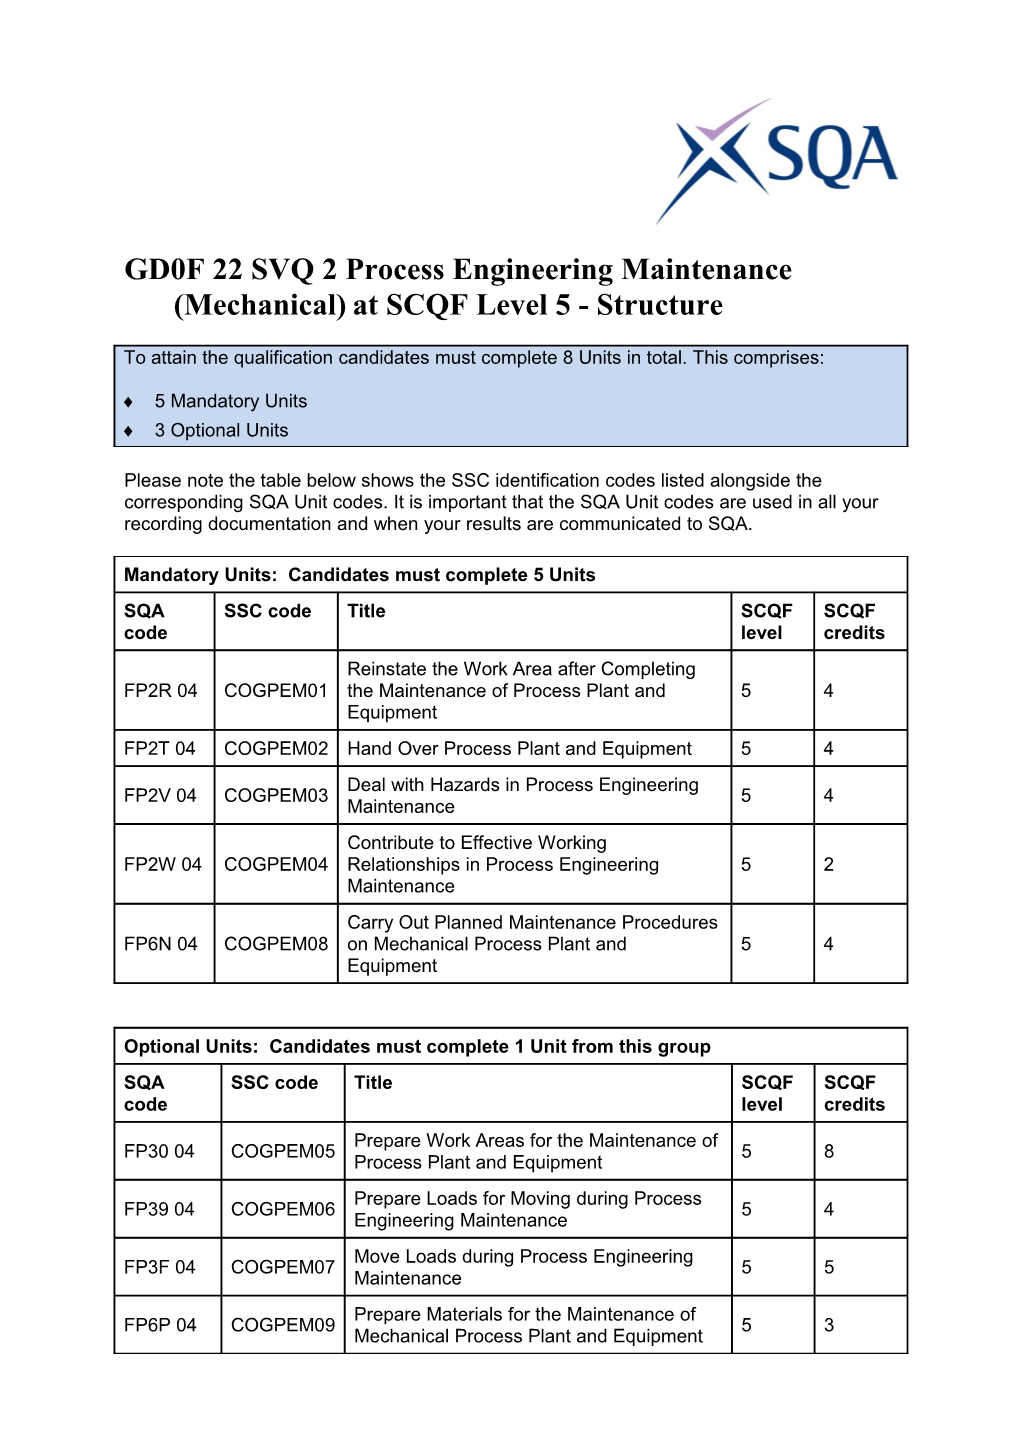 GD0F 22SVQ 2 Process Engineering Maintenance (Mechanical)At SCQF Level 5 - Structure